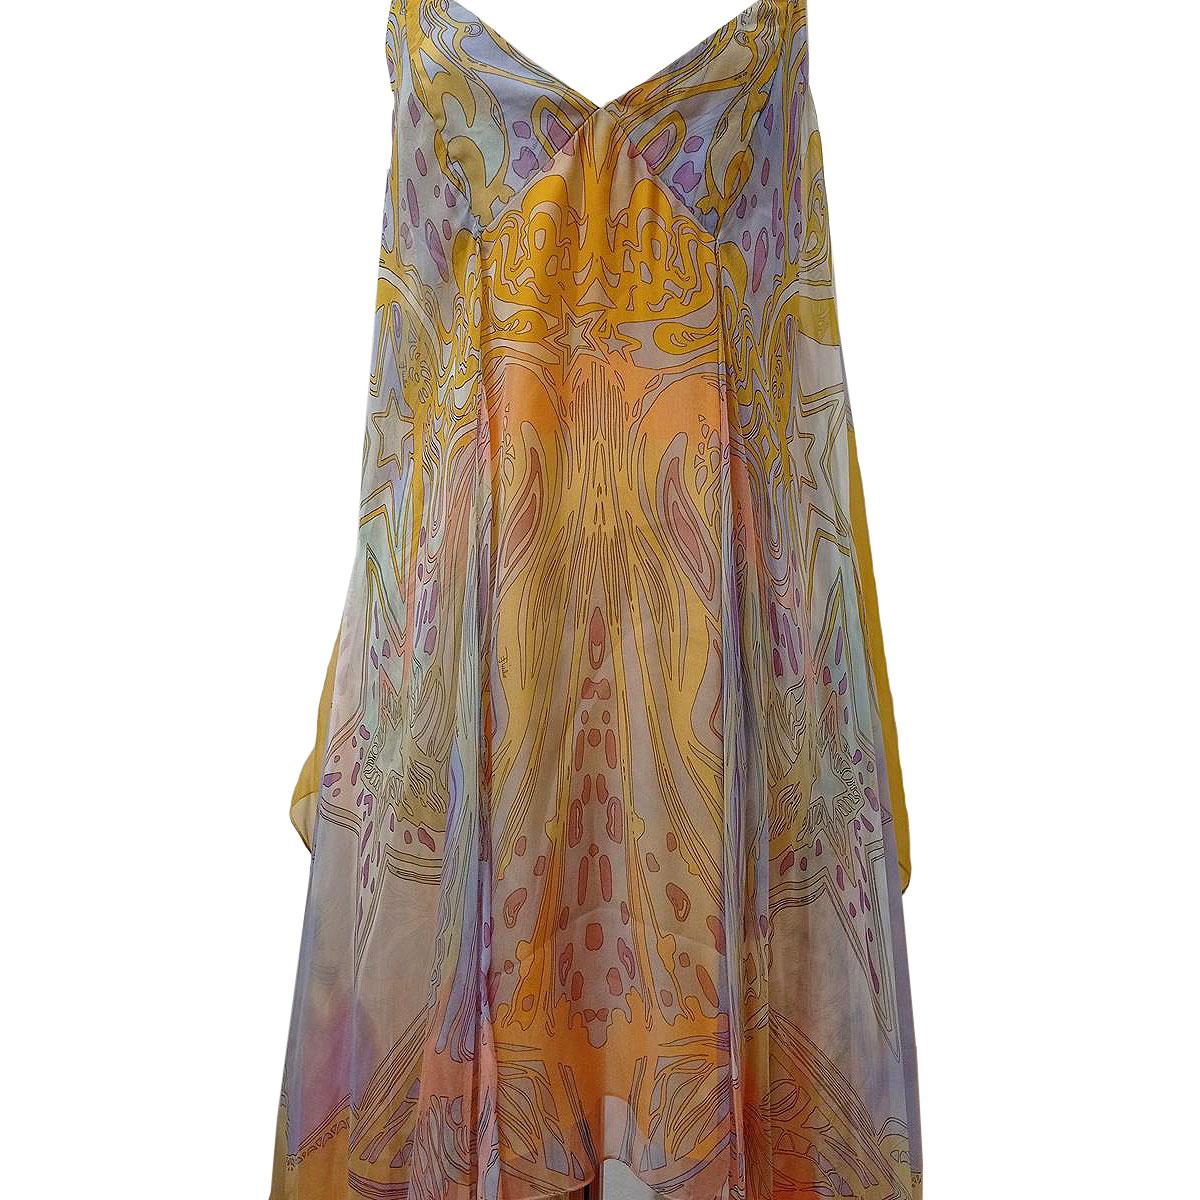 Beautiful dress by Emilio Pucci
Silk
Multicolor fancy
Straps adorned with precious stones and metal details
Two beautiful long side draperies
Asymmetrical
Total length cm 150 (59 inches)
Worldwide express shipping included in the price !